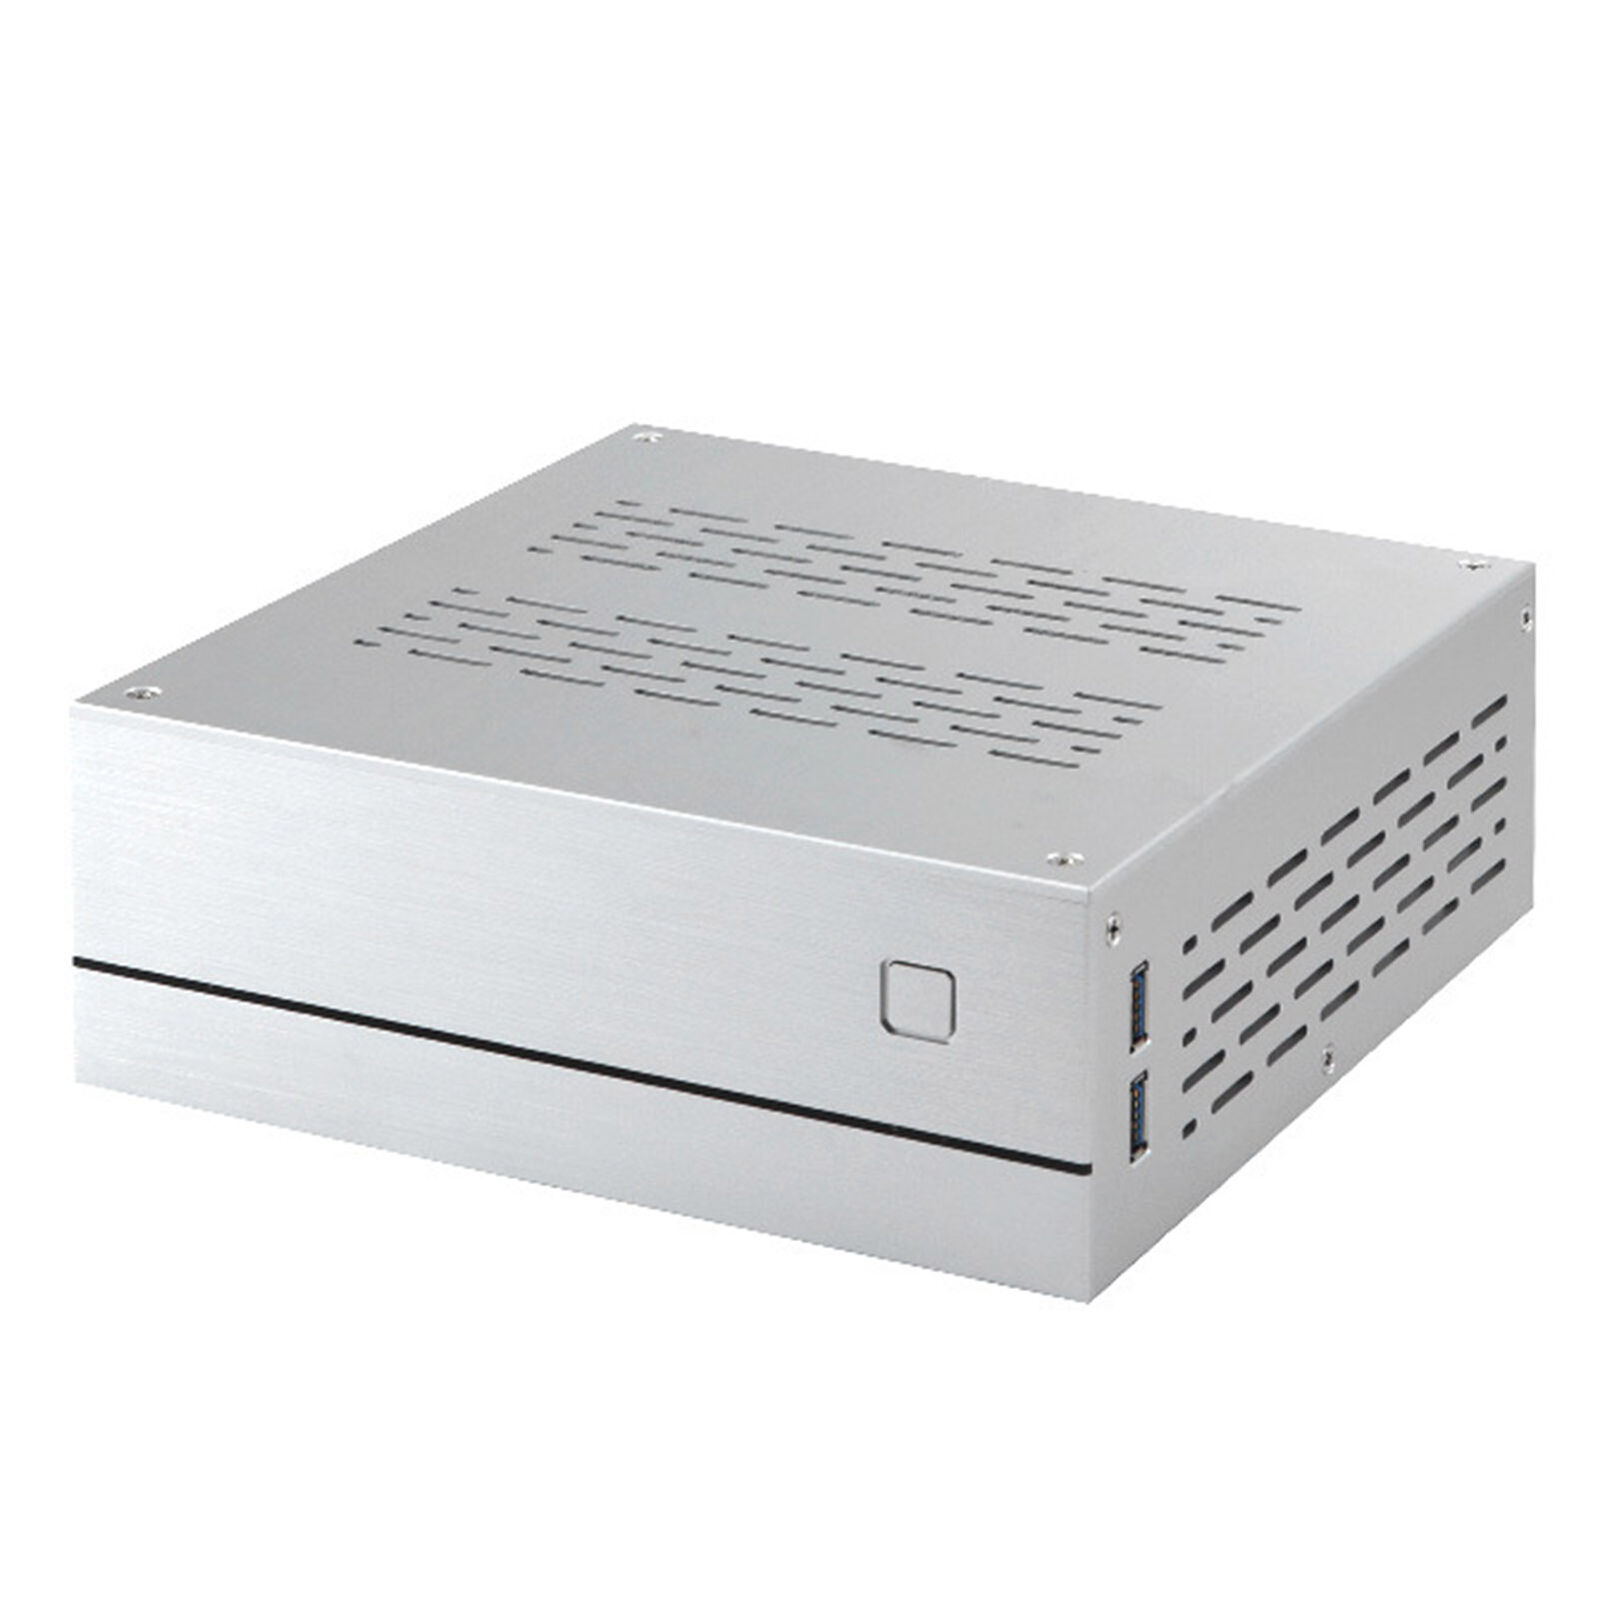 Aluminum Alloy Mini-itx Motherboard Computer Case with Screw for Htpc Heat